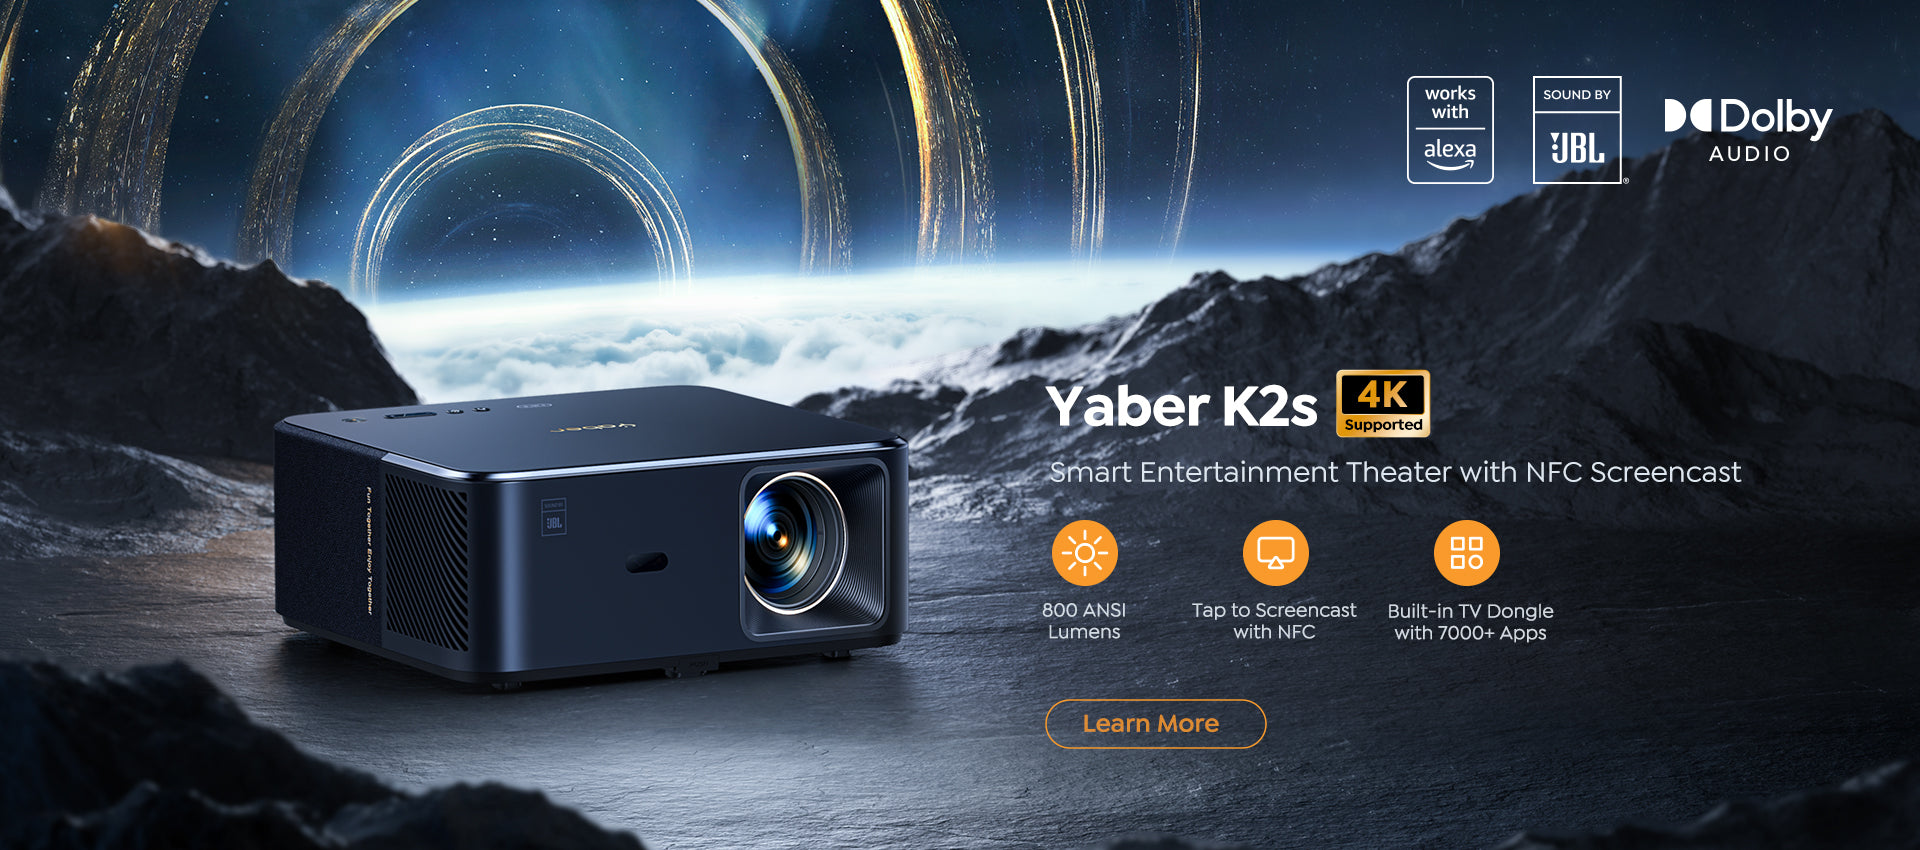 Yaber Y60 TFT LCD Projector Specs